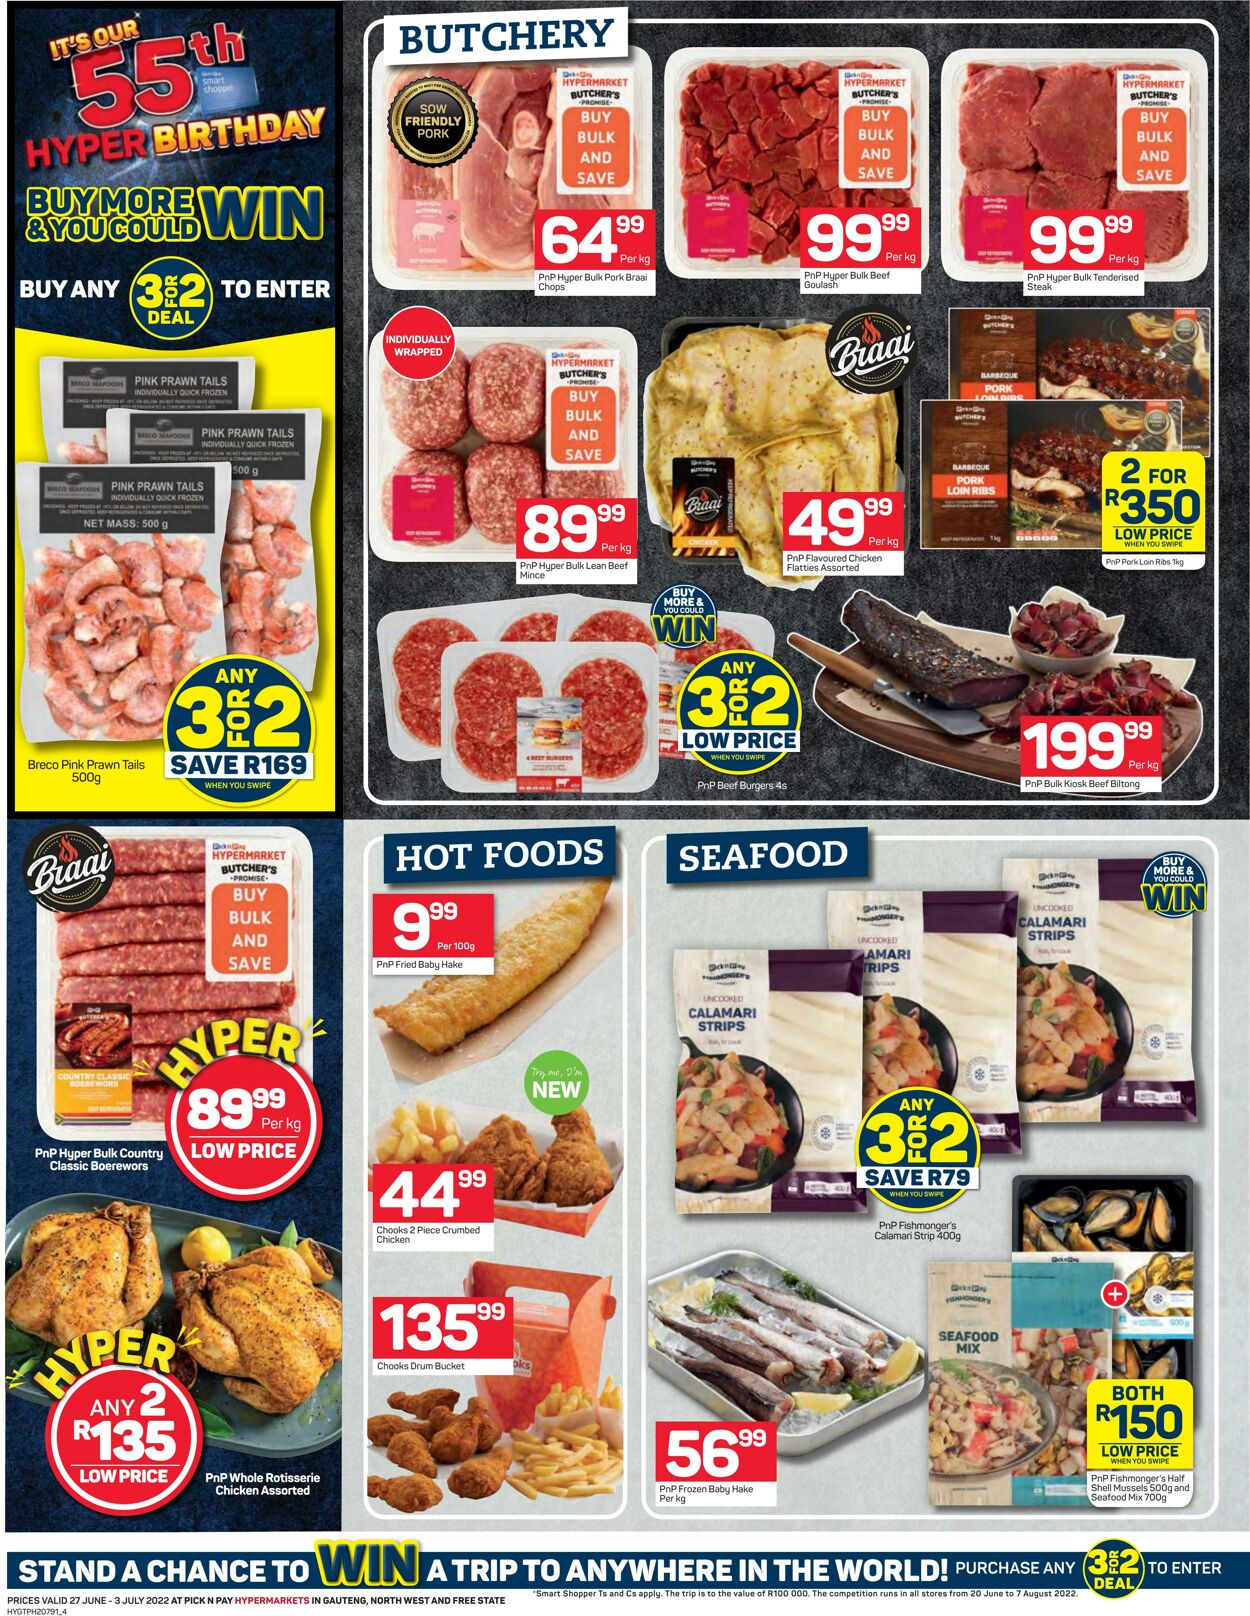 Special Pick n Pay 27.06.2022 - 03.07.2022